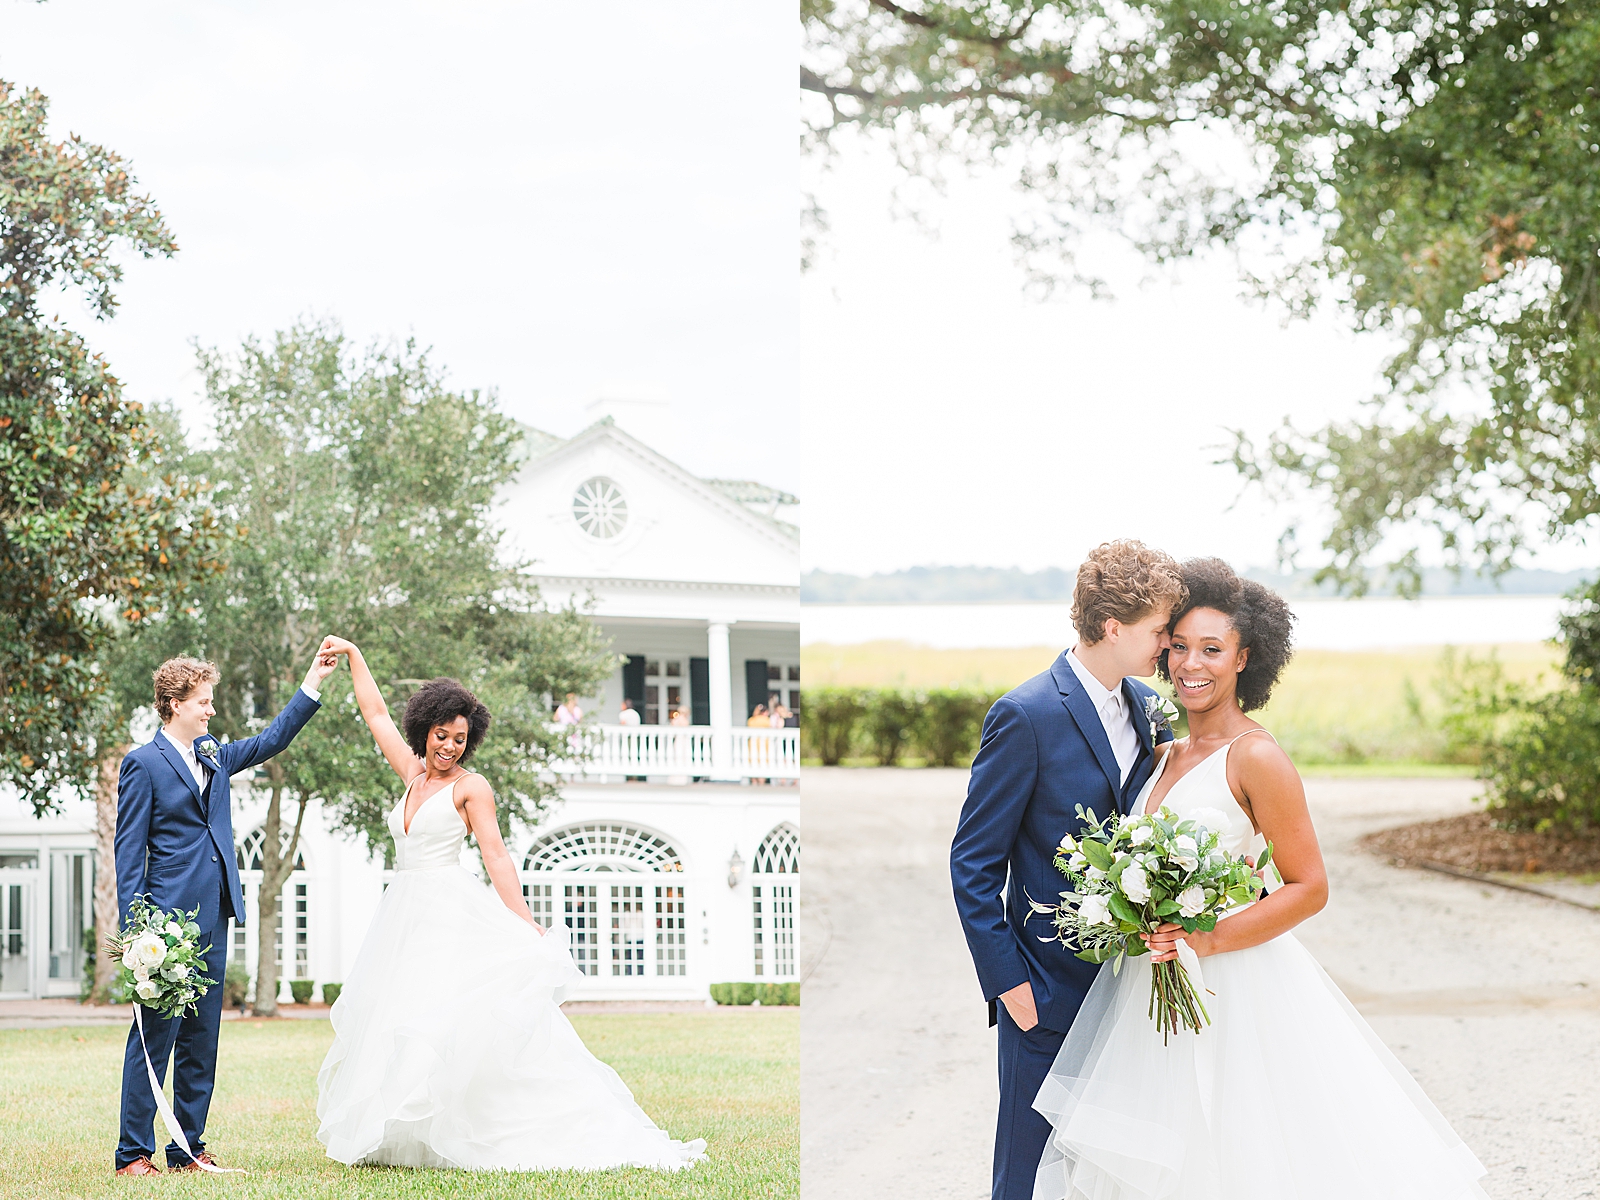 Lowndes Grove Wedding Groom Twirling Bride and Groom nuzzling bride Photos